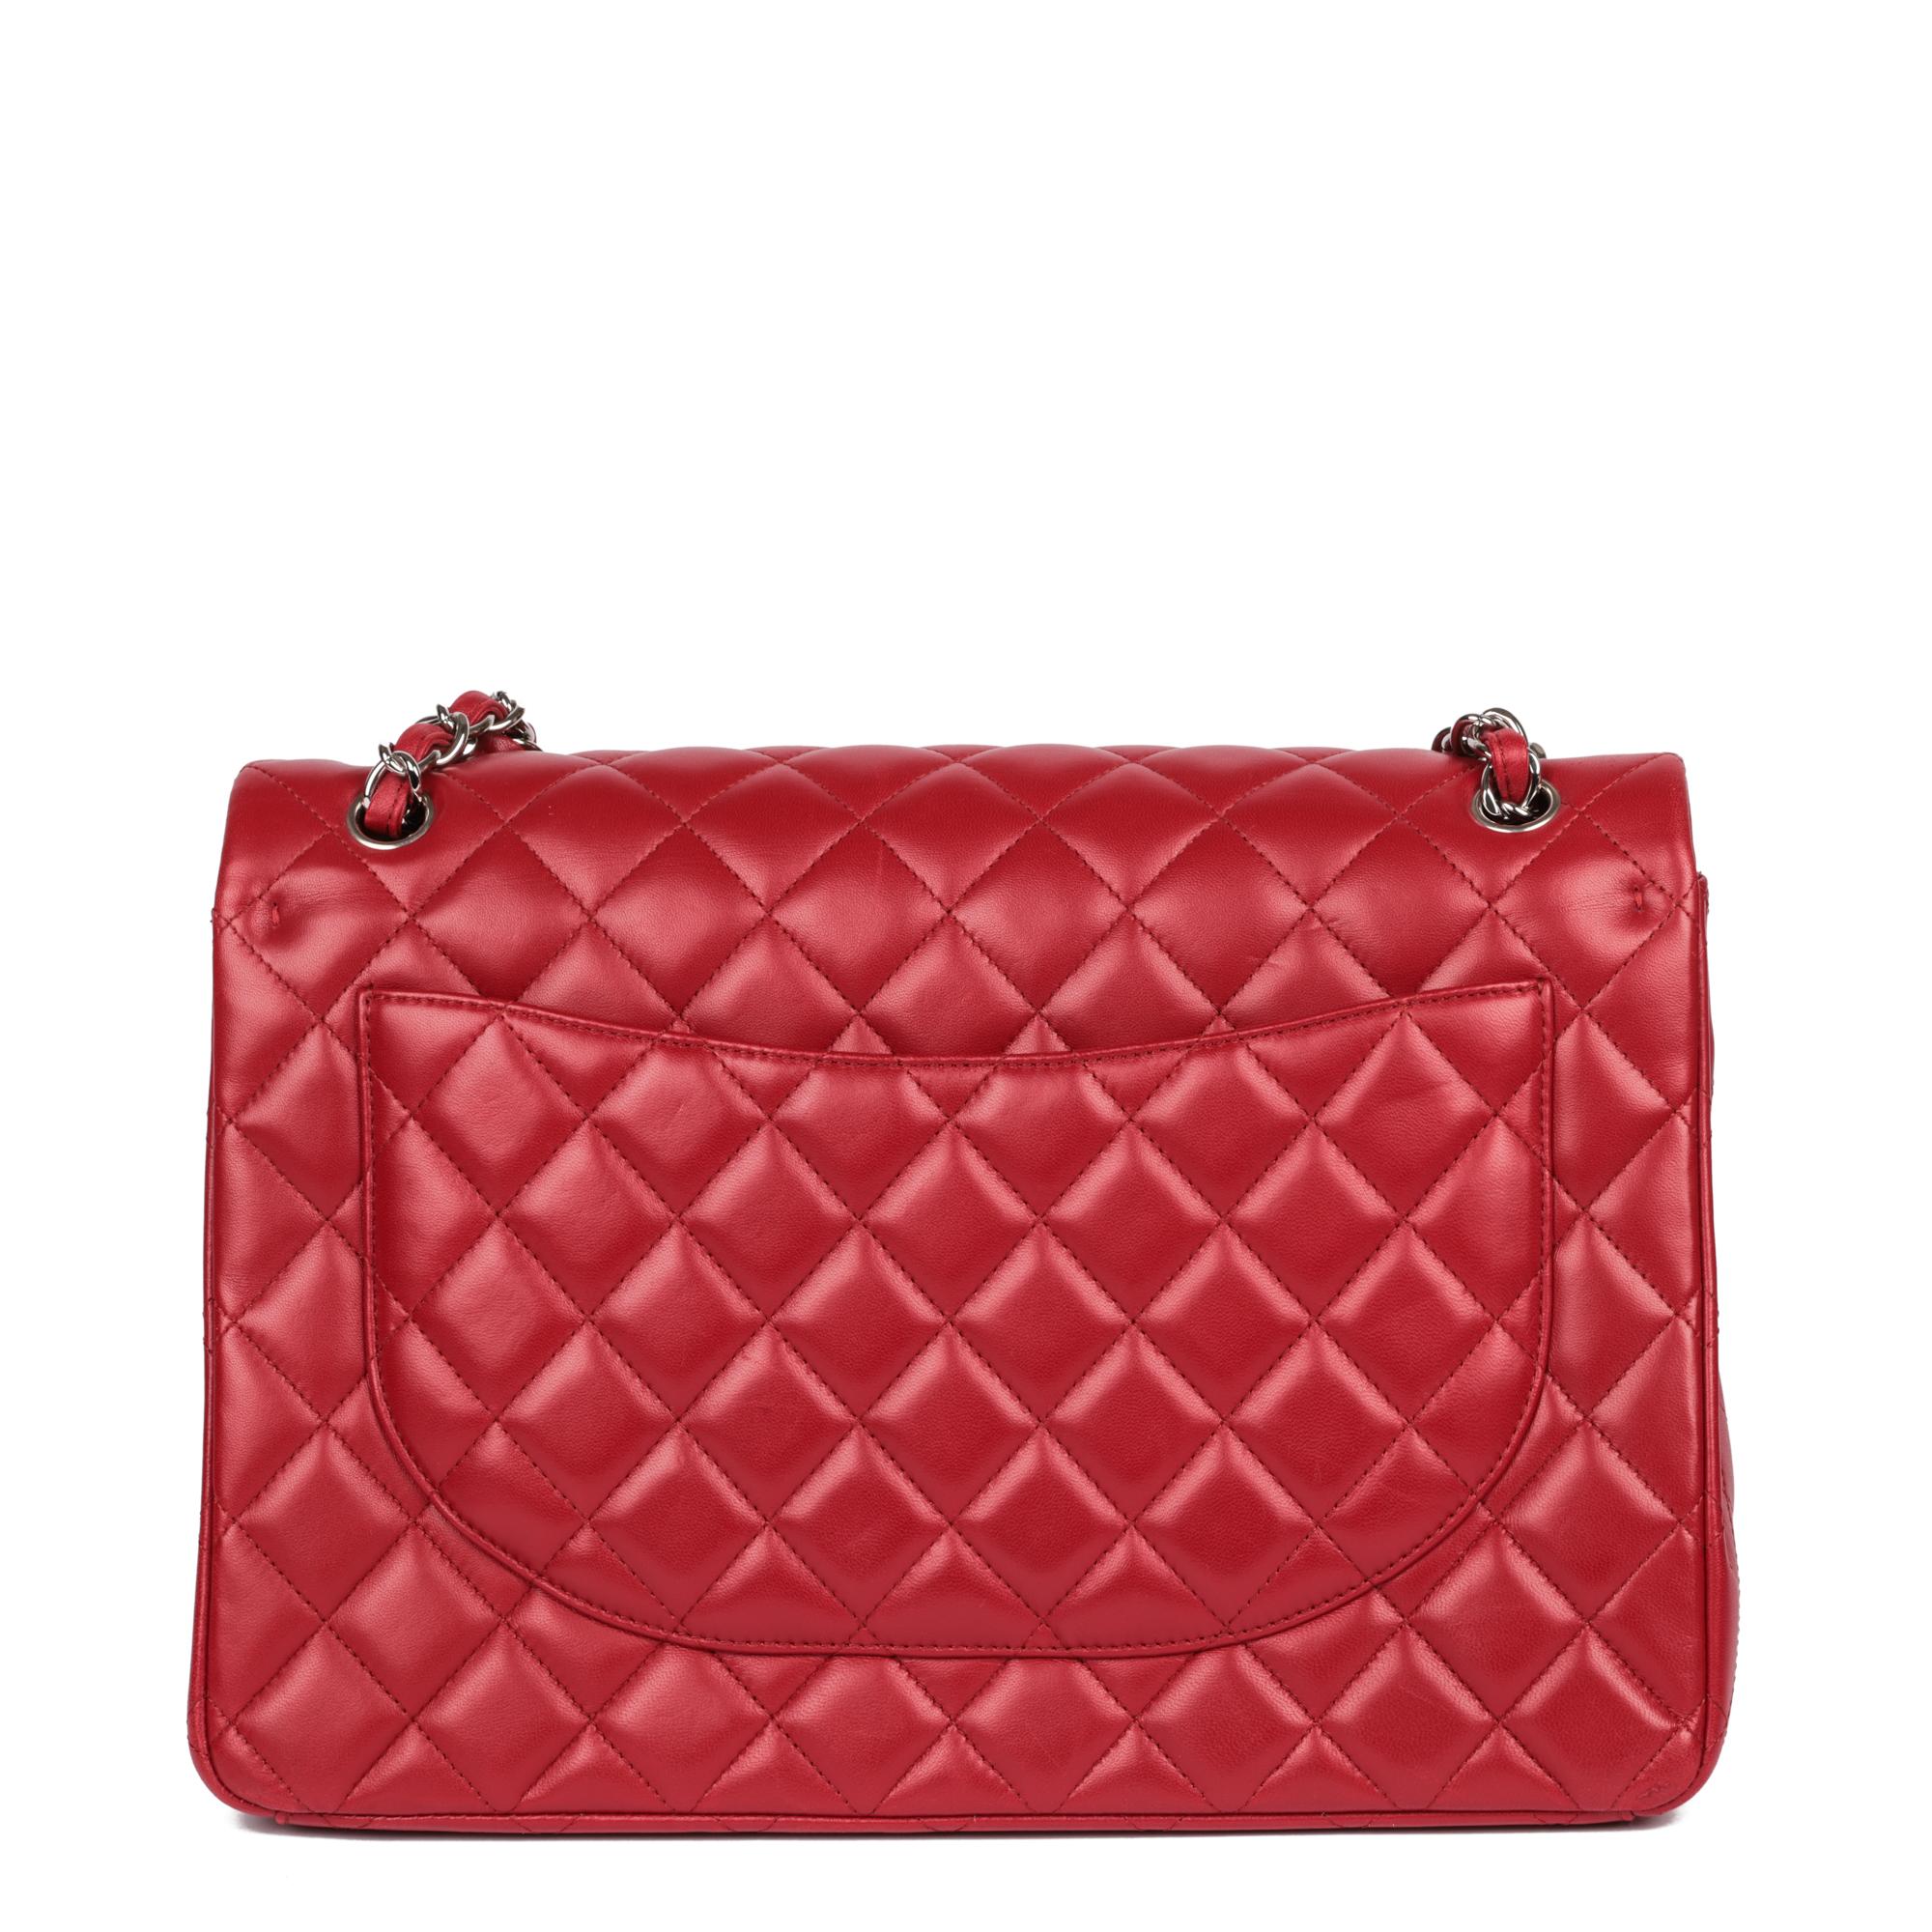 CHANEL Red Quilted Lambskin Leather Maxi Classic Double Flap Bag 1